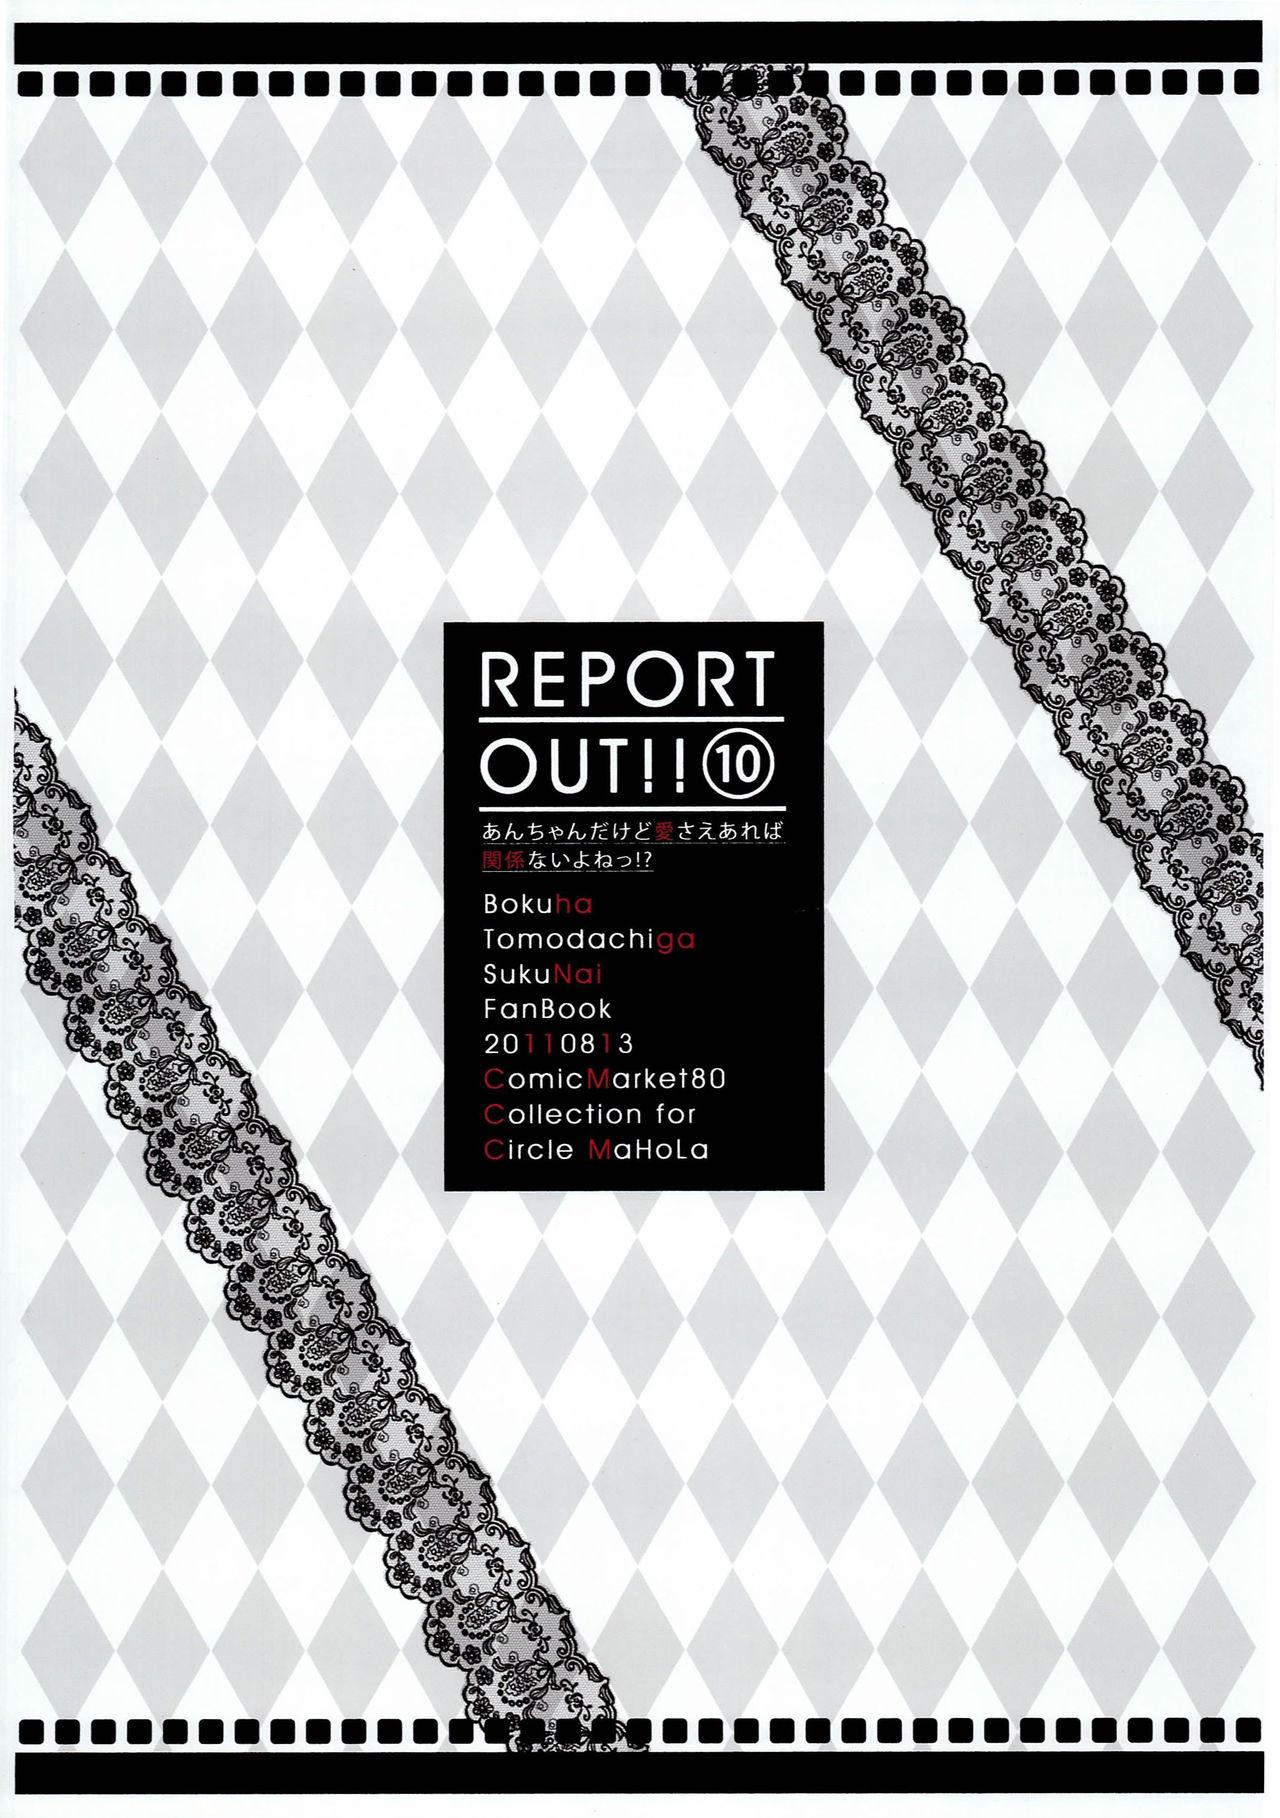 REPORT OUT!! Vol. 10 10